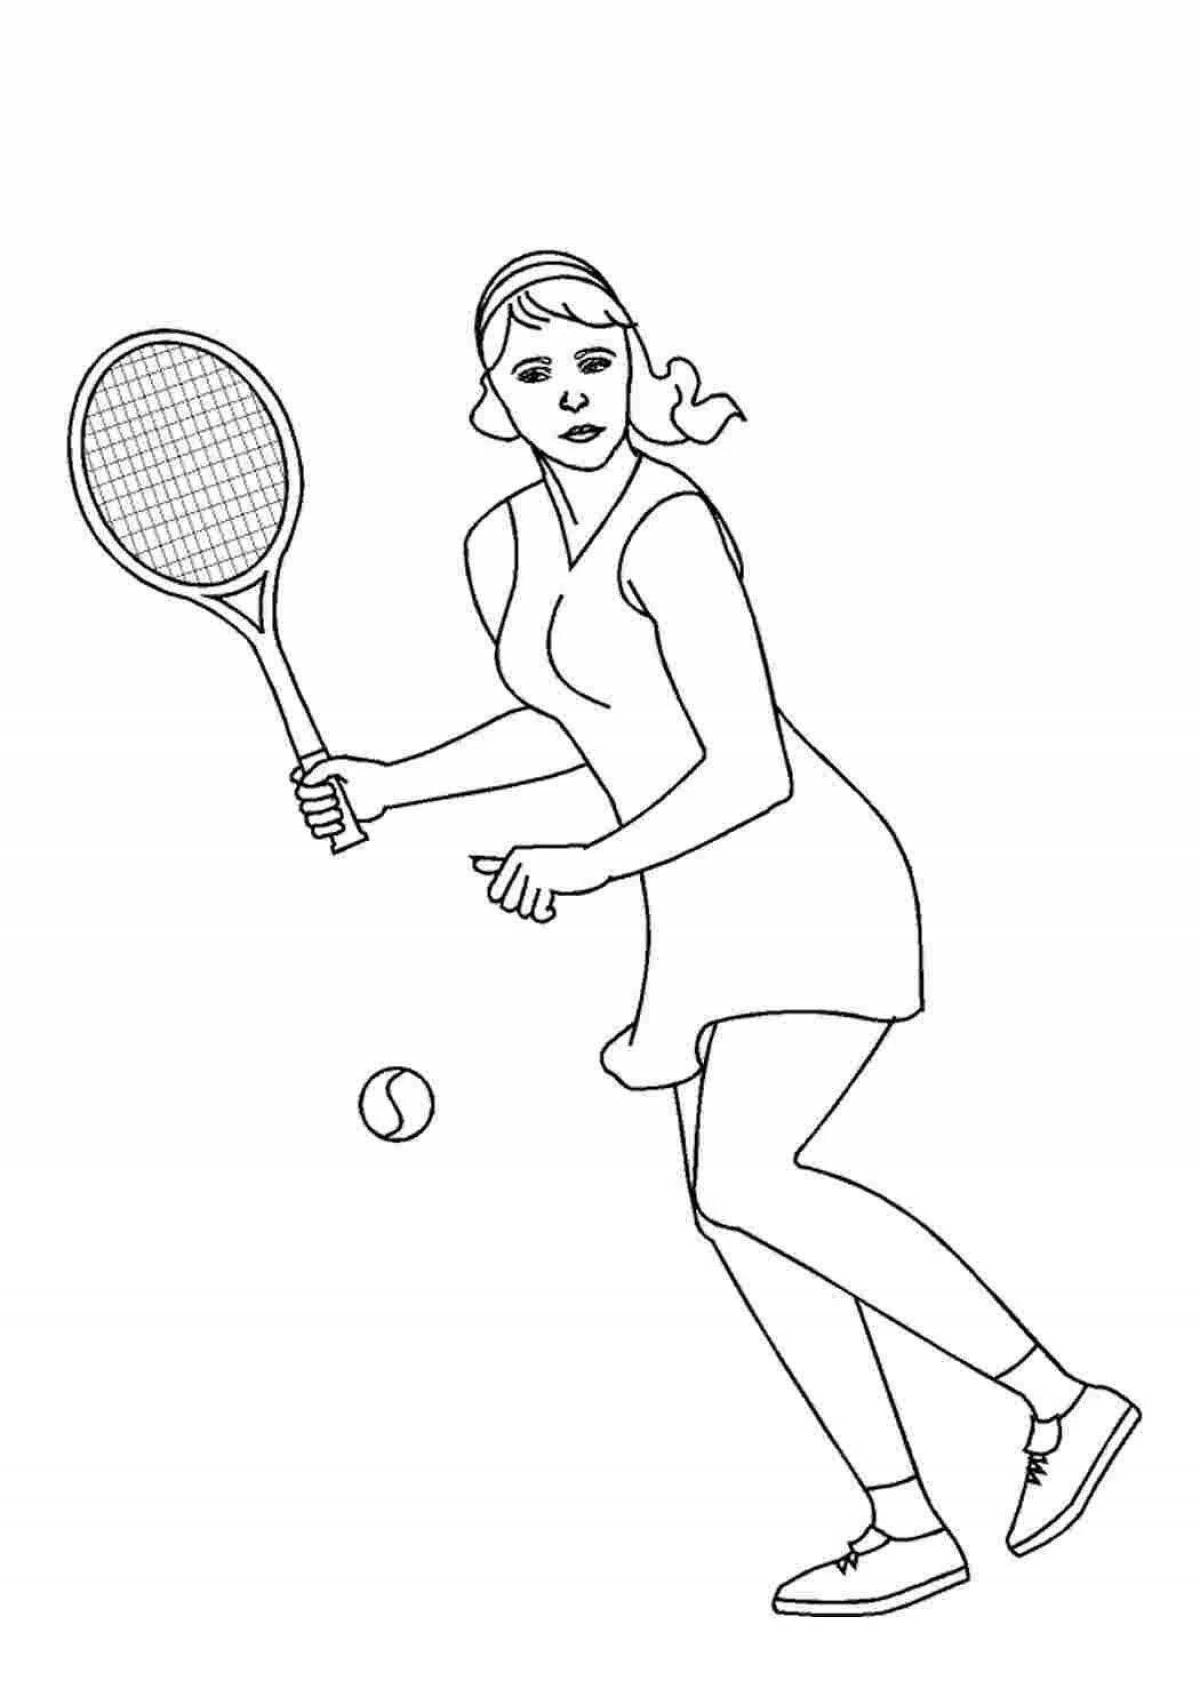 Amazing tennis coloring book for kids